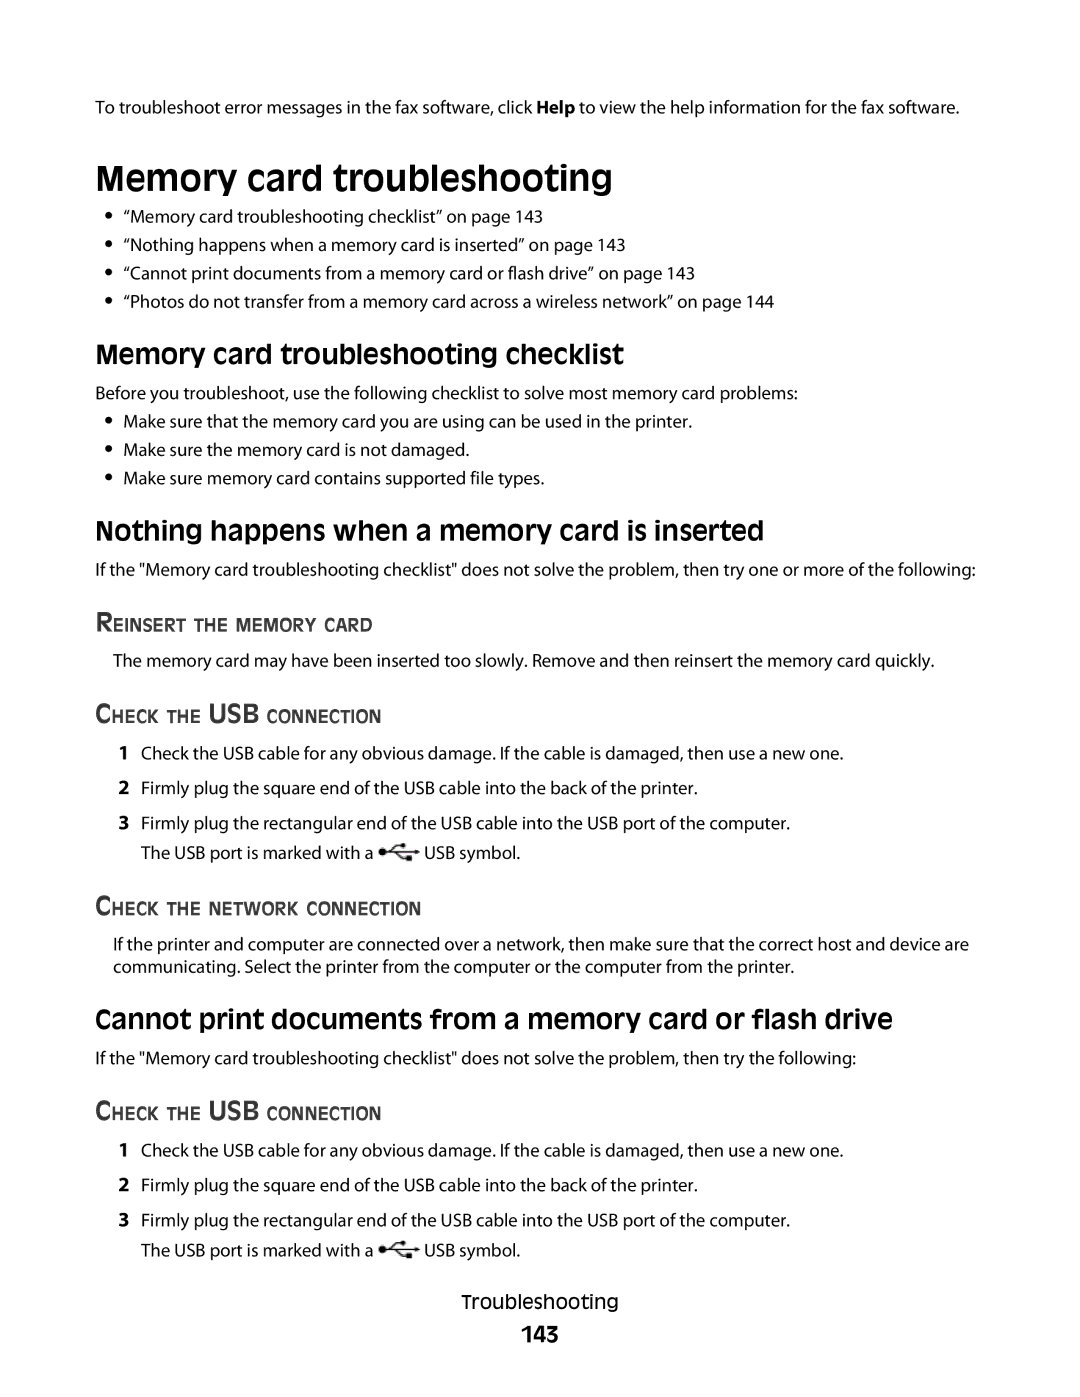 Lexmark Pro700 Series manual Memory card troubleshooting checklist, Nothing happens when a memory card is inserted, 143 